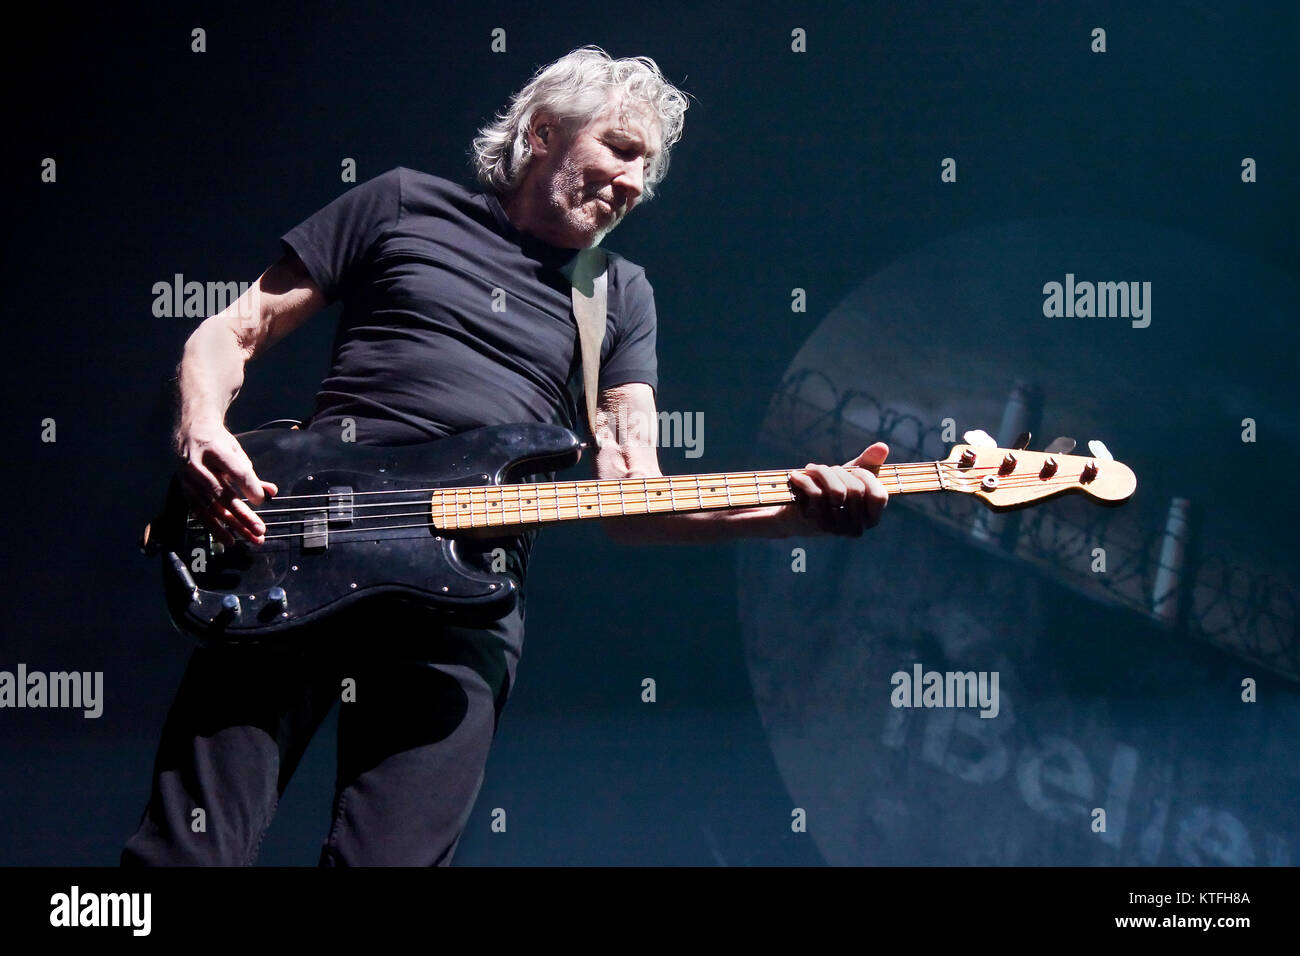 The British singer, songwriter and musician Roger Waters performs a live concert at Telenor Arena in Oslo. Roger Waters is well known as the co-founder and band member of the progressive rock band Pink Floyd. Norway, 30/04 2011. Stock Photo